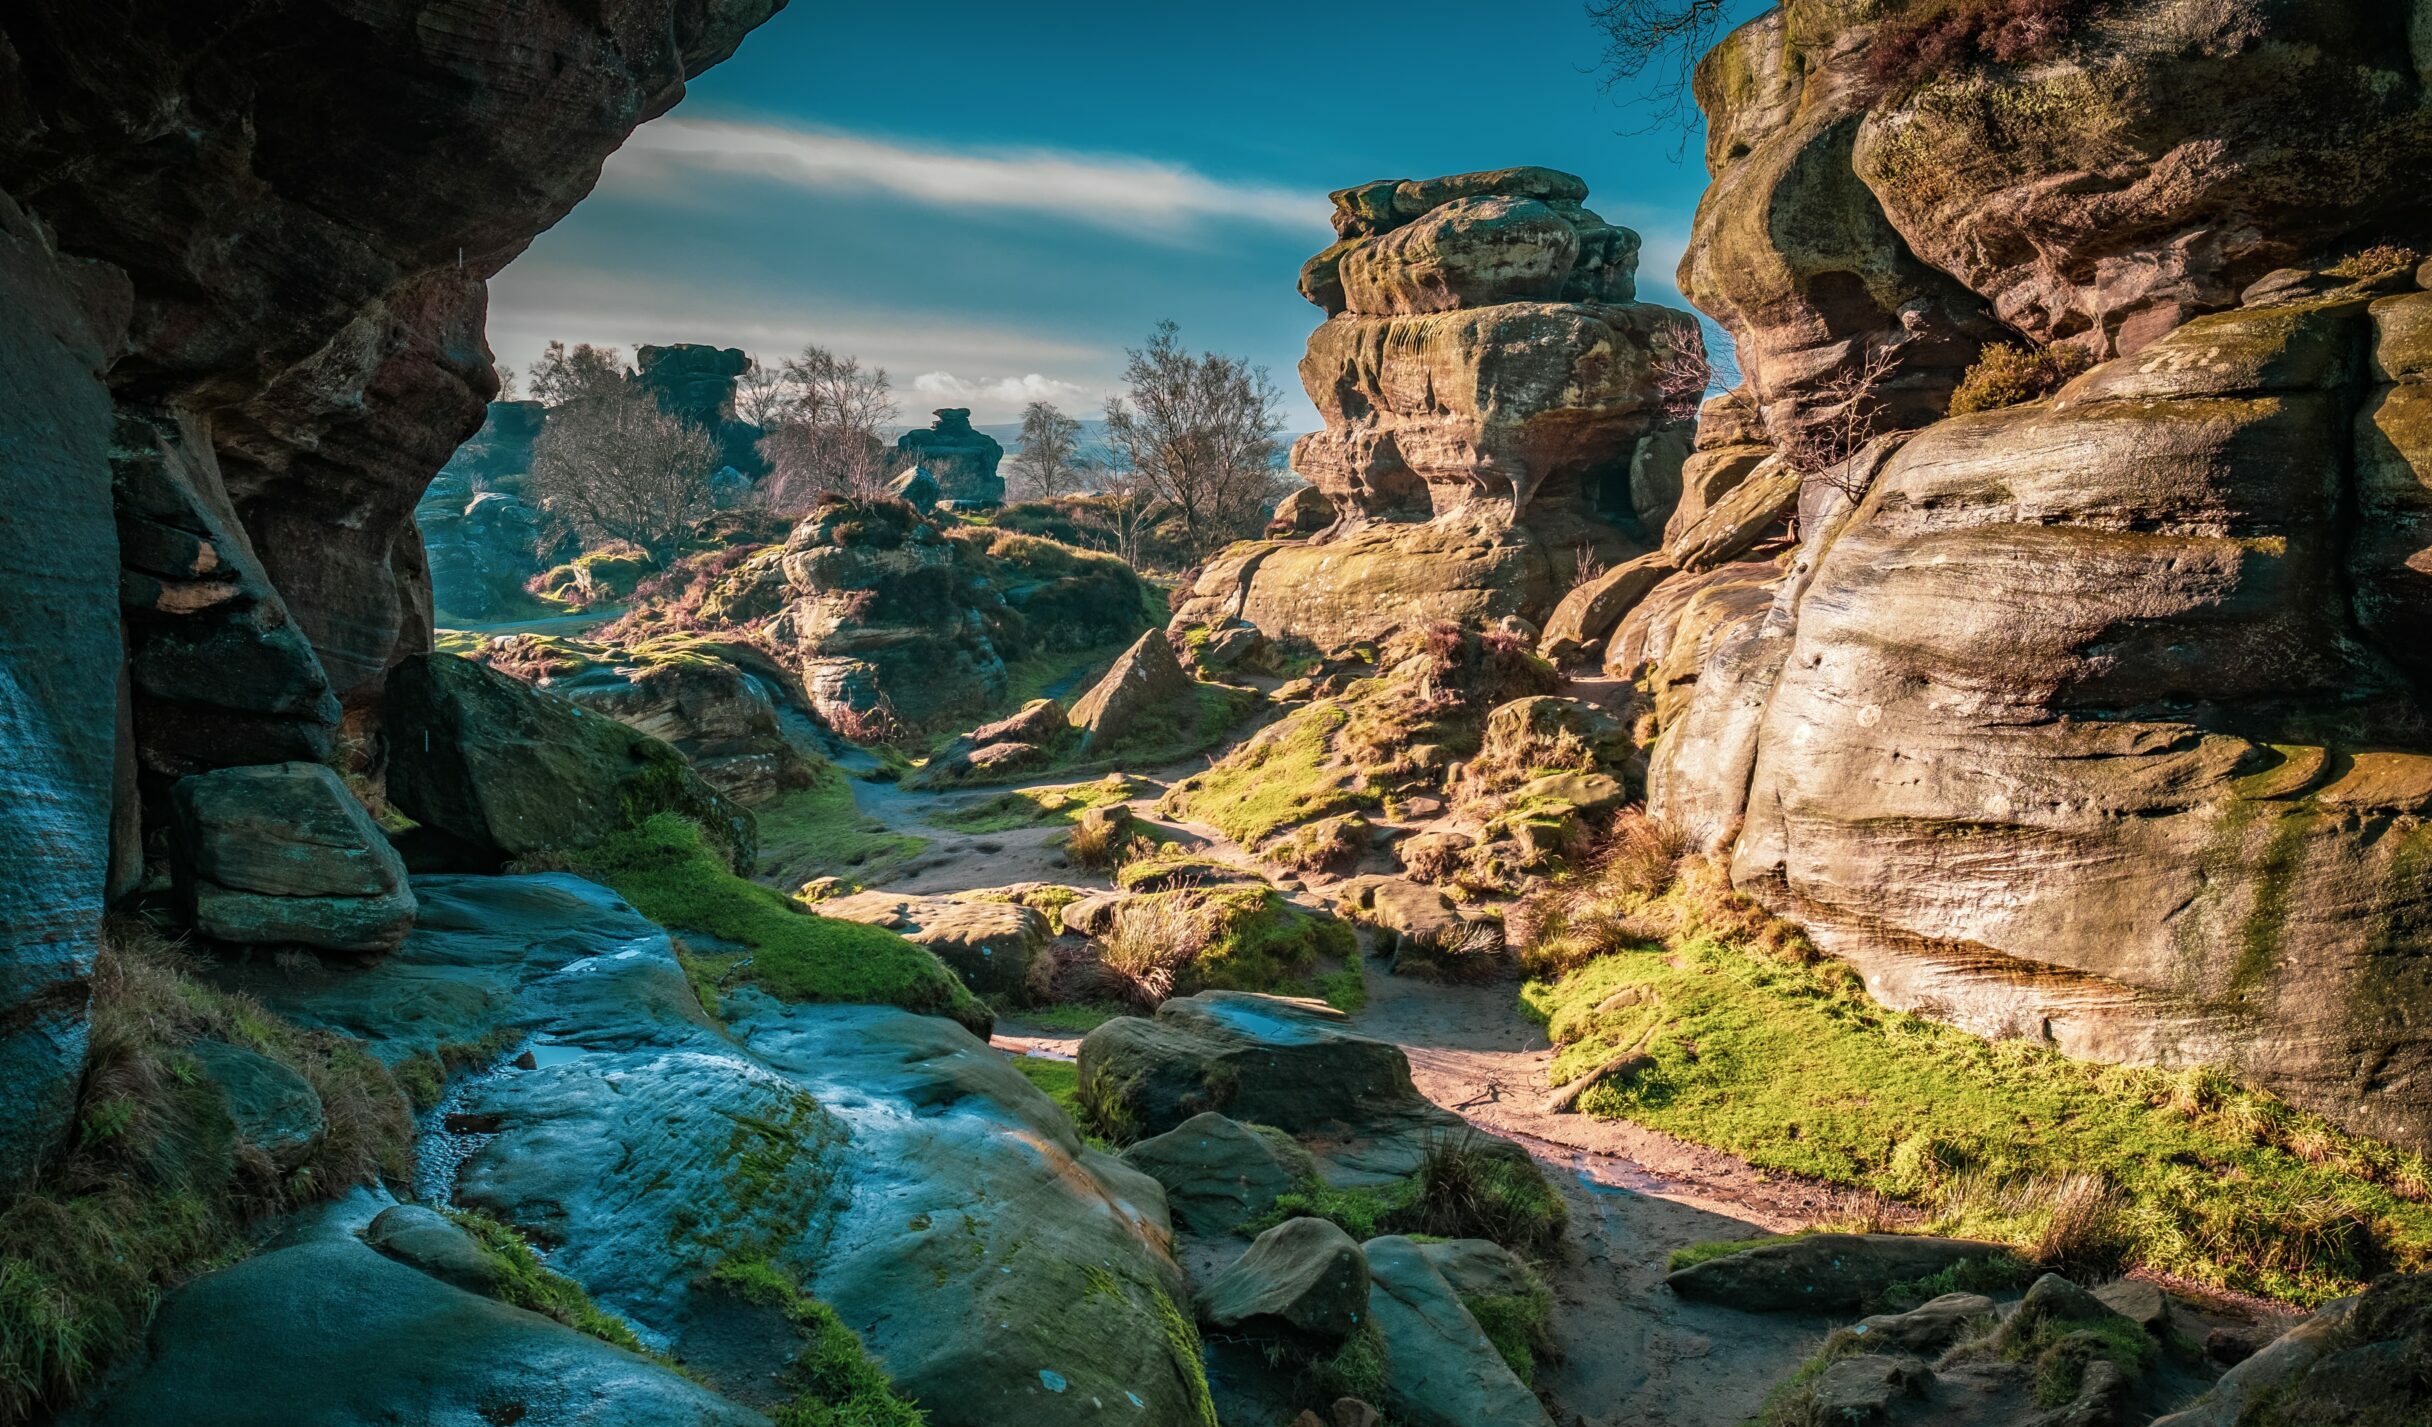 An ultimate UK family staycation should include a trip to the adventurous Brimham Rocks.